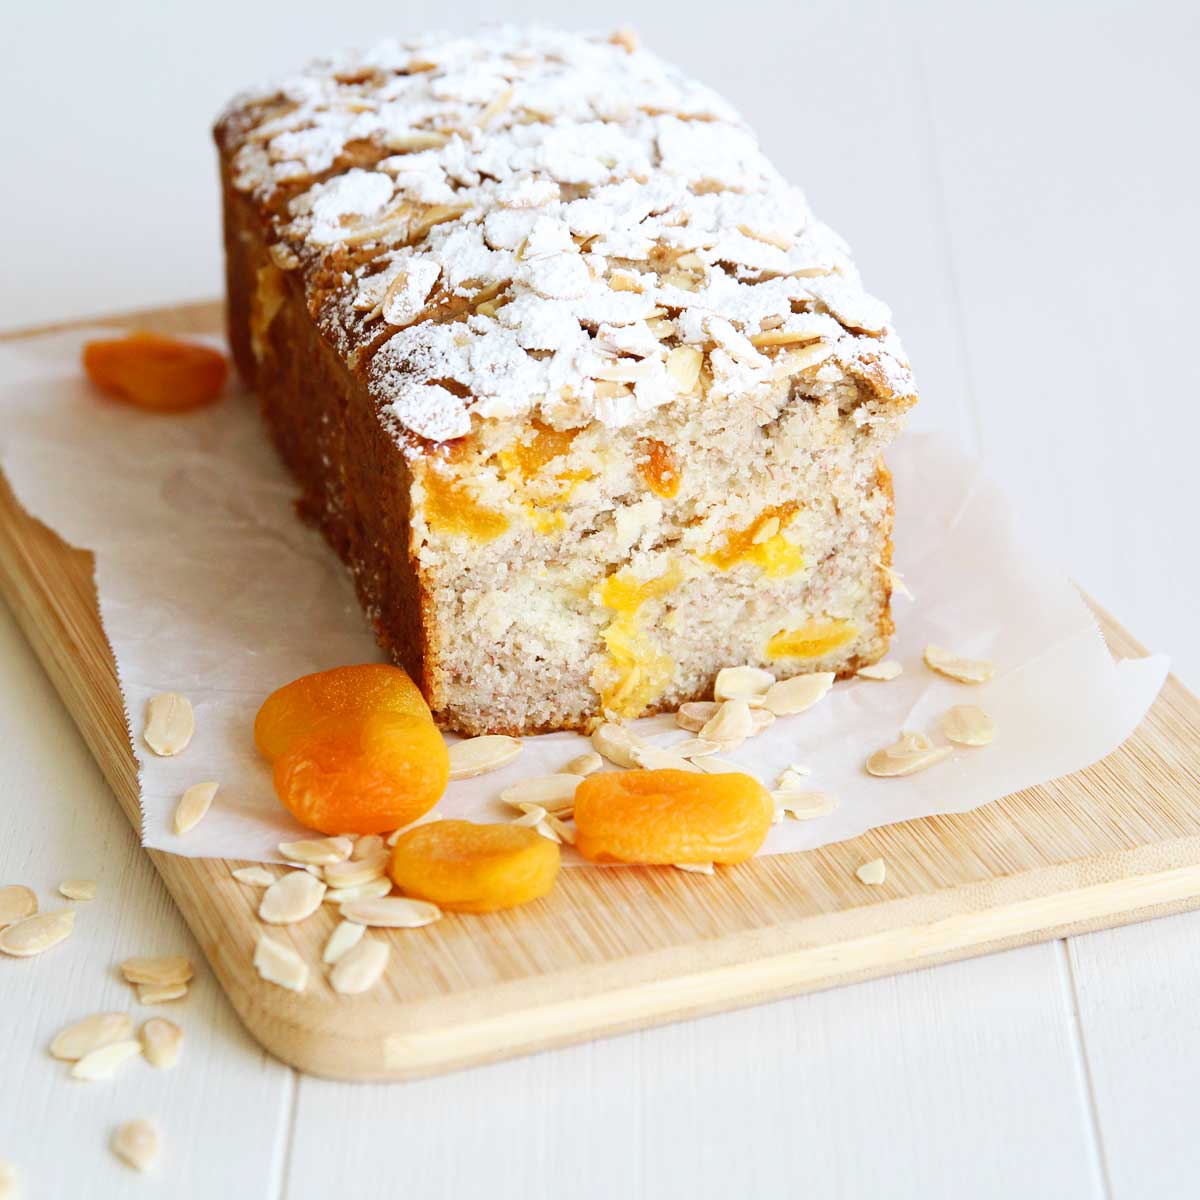 Simply Divine: Moist Vegan Almond Banana Bread with Apricots (Eggless, Dairy Free!) - Flourless Banana Roll Cake